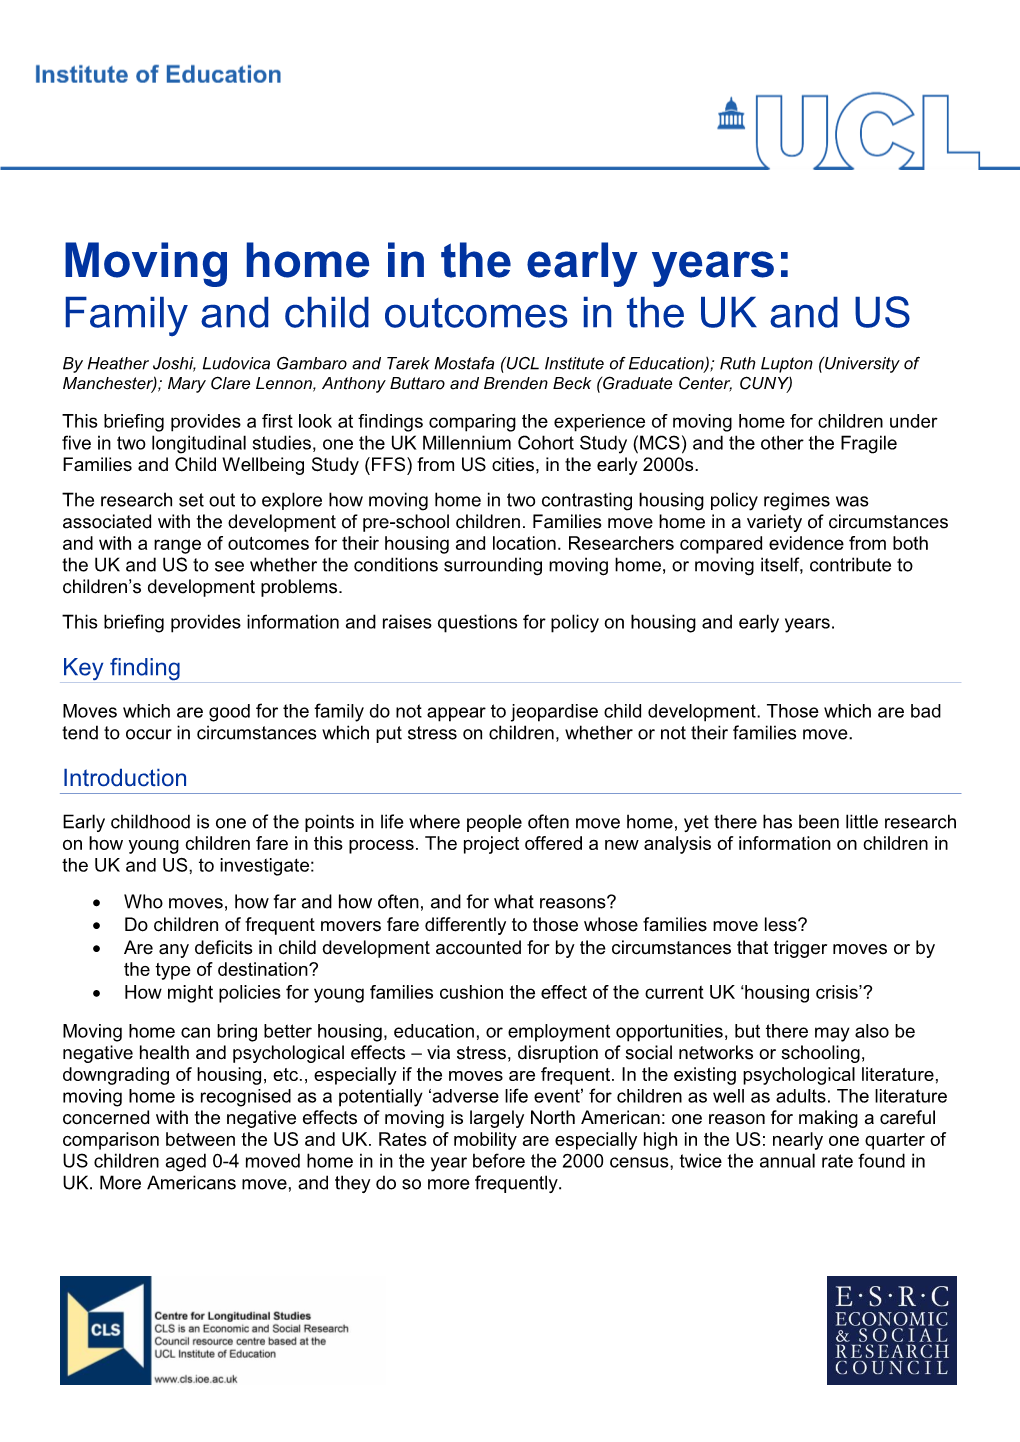 Moving Home in the Early Years: Family and Child Outcomes in the UK and US